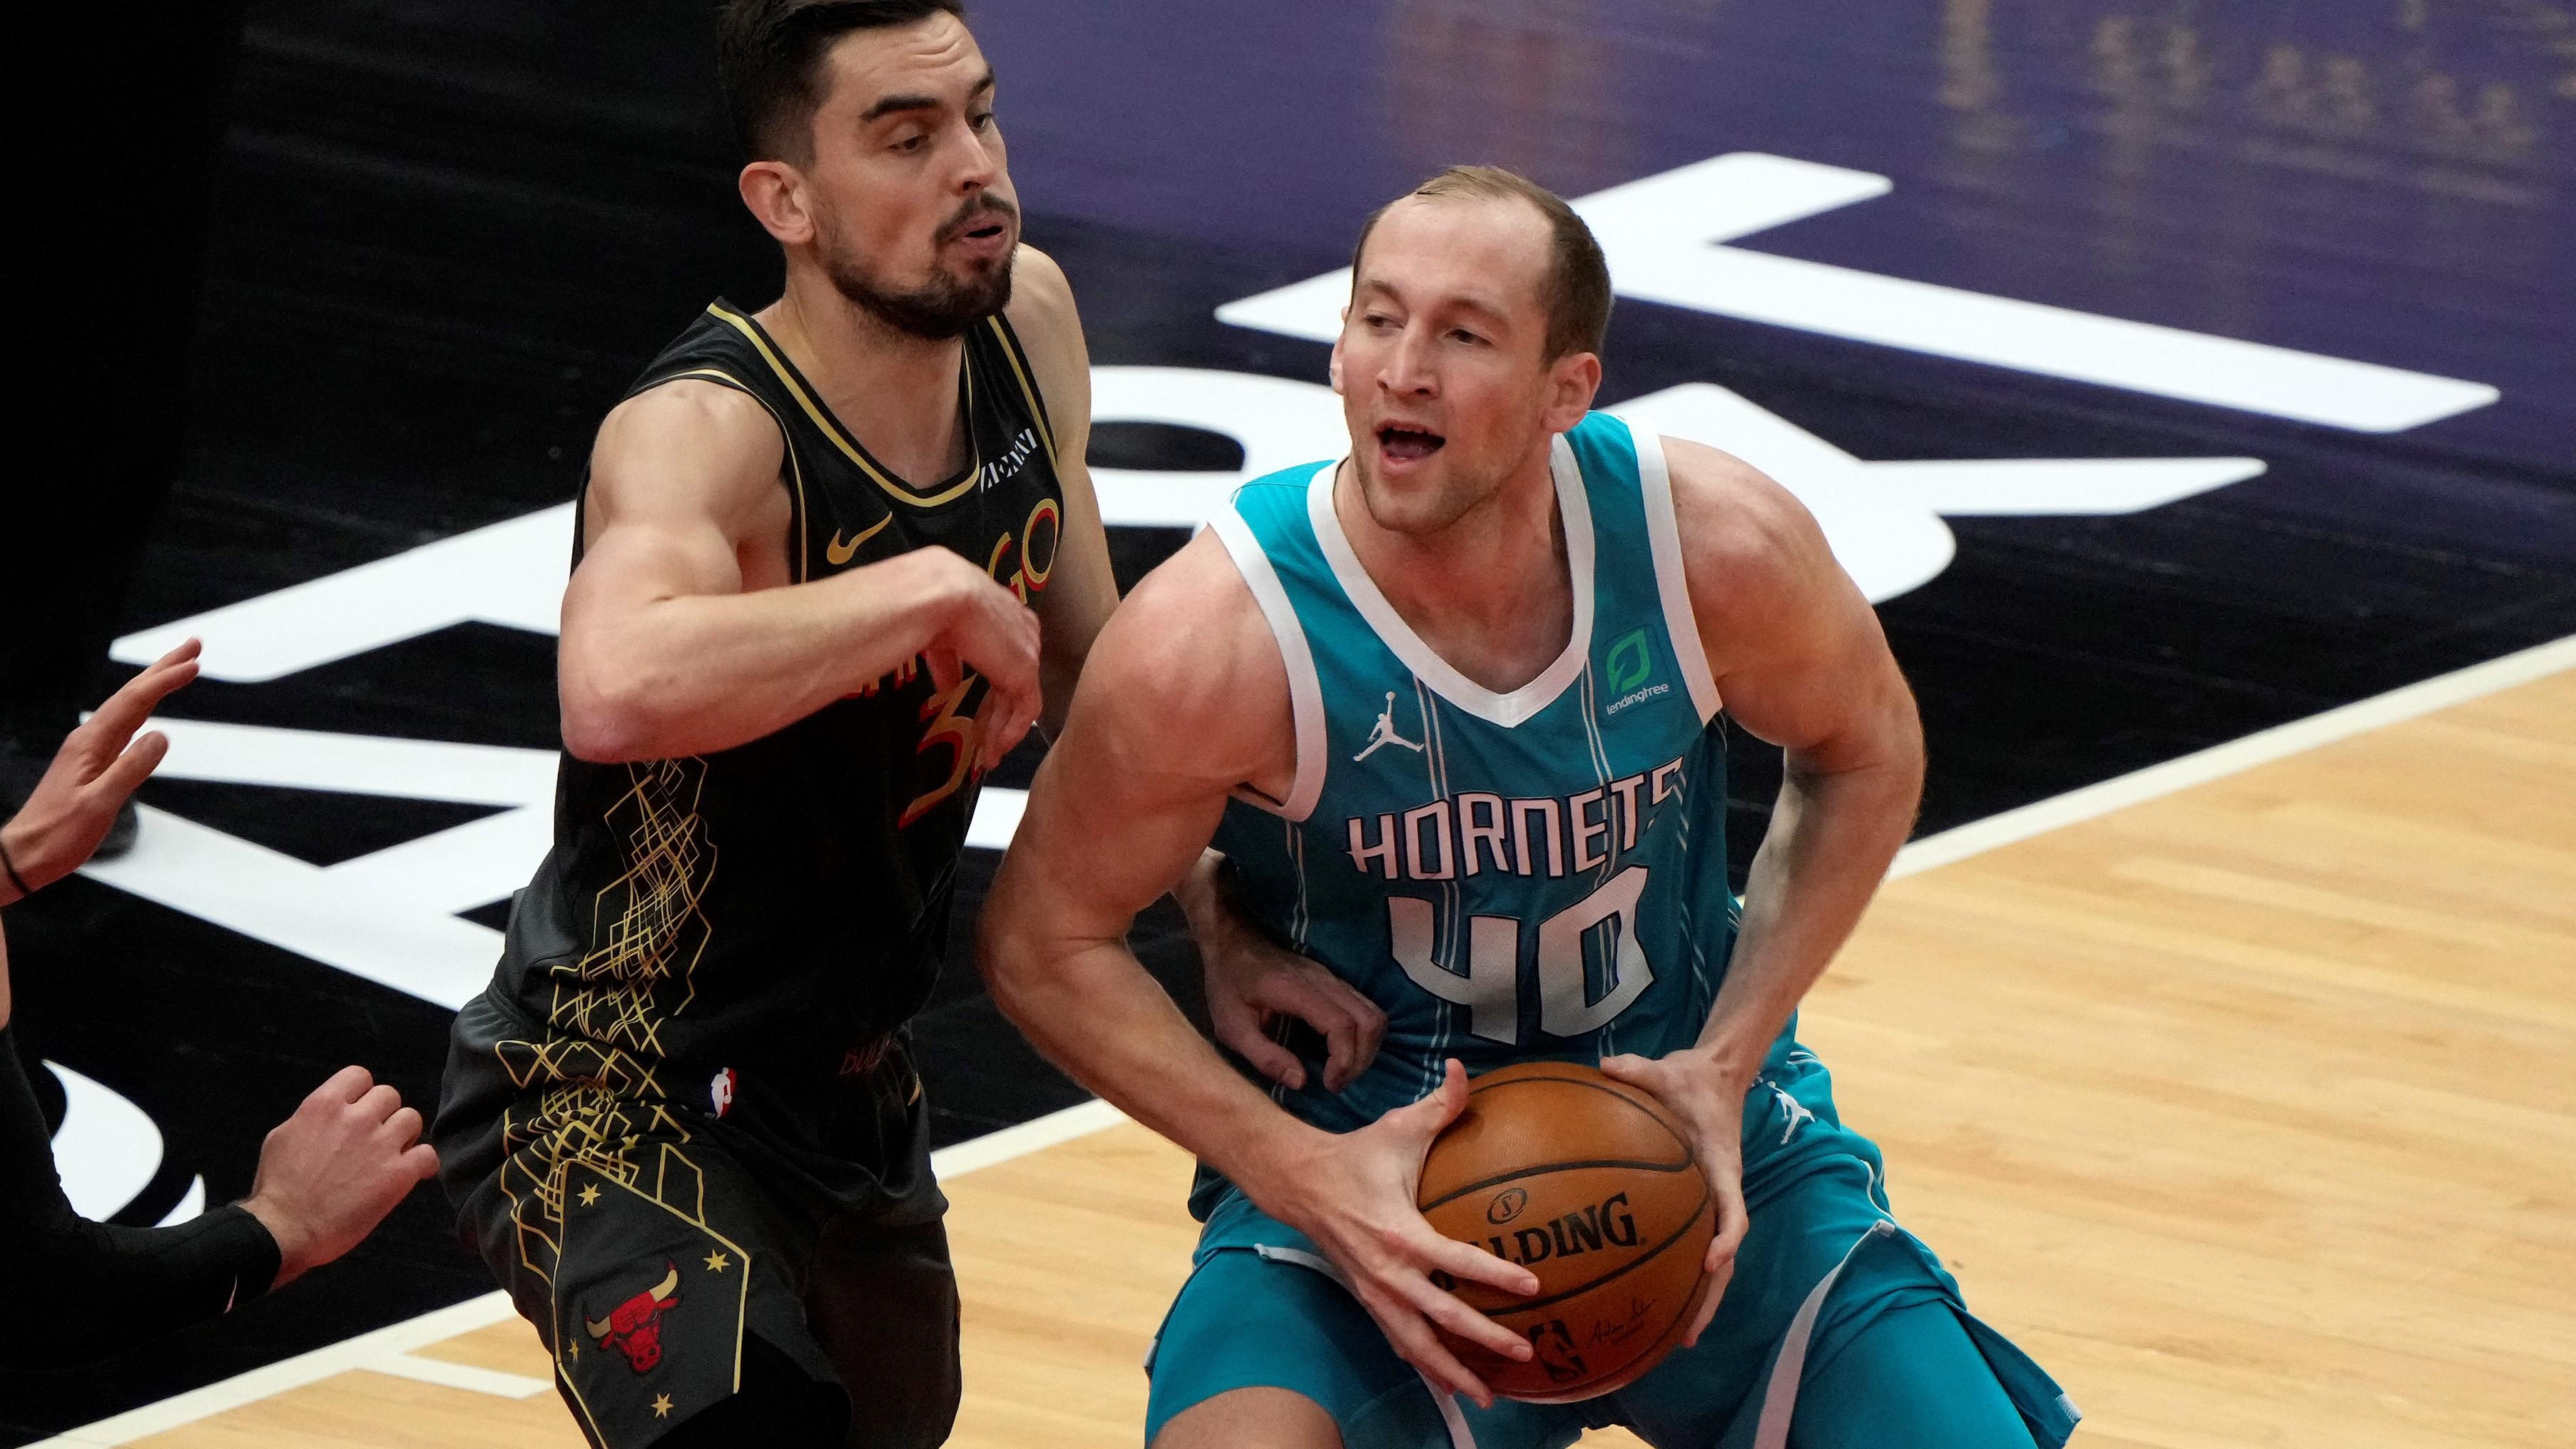 Apr 22, 2021; Chicago, Illinois, USA; Charlotte Hornets center Cody Zeller (40) attempts to shoot against Chicago Bulls guard Tomas Satoransky (31) during the second quarter at the United Center. Mandatory Credit: Mike Dinovo-USA TODAY Sports / Mike Dinovo-USA TODAY Sports